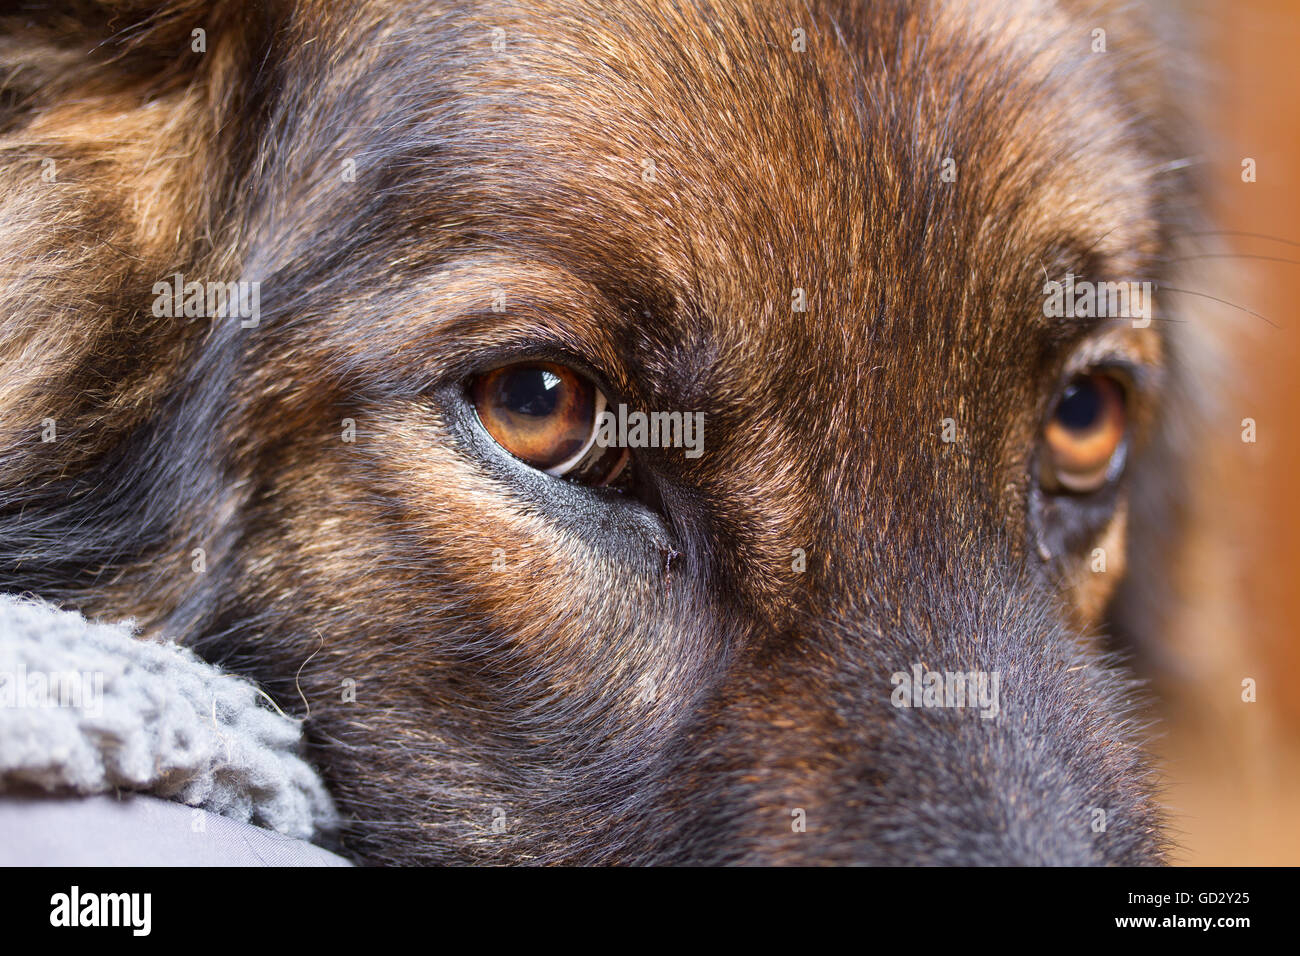 German Shepherd Dog or Alsatian dogs eyes looking at the camera, he is sable colored. Stock Photo